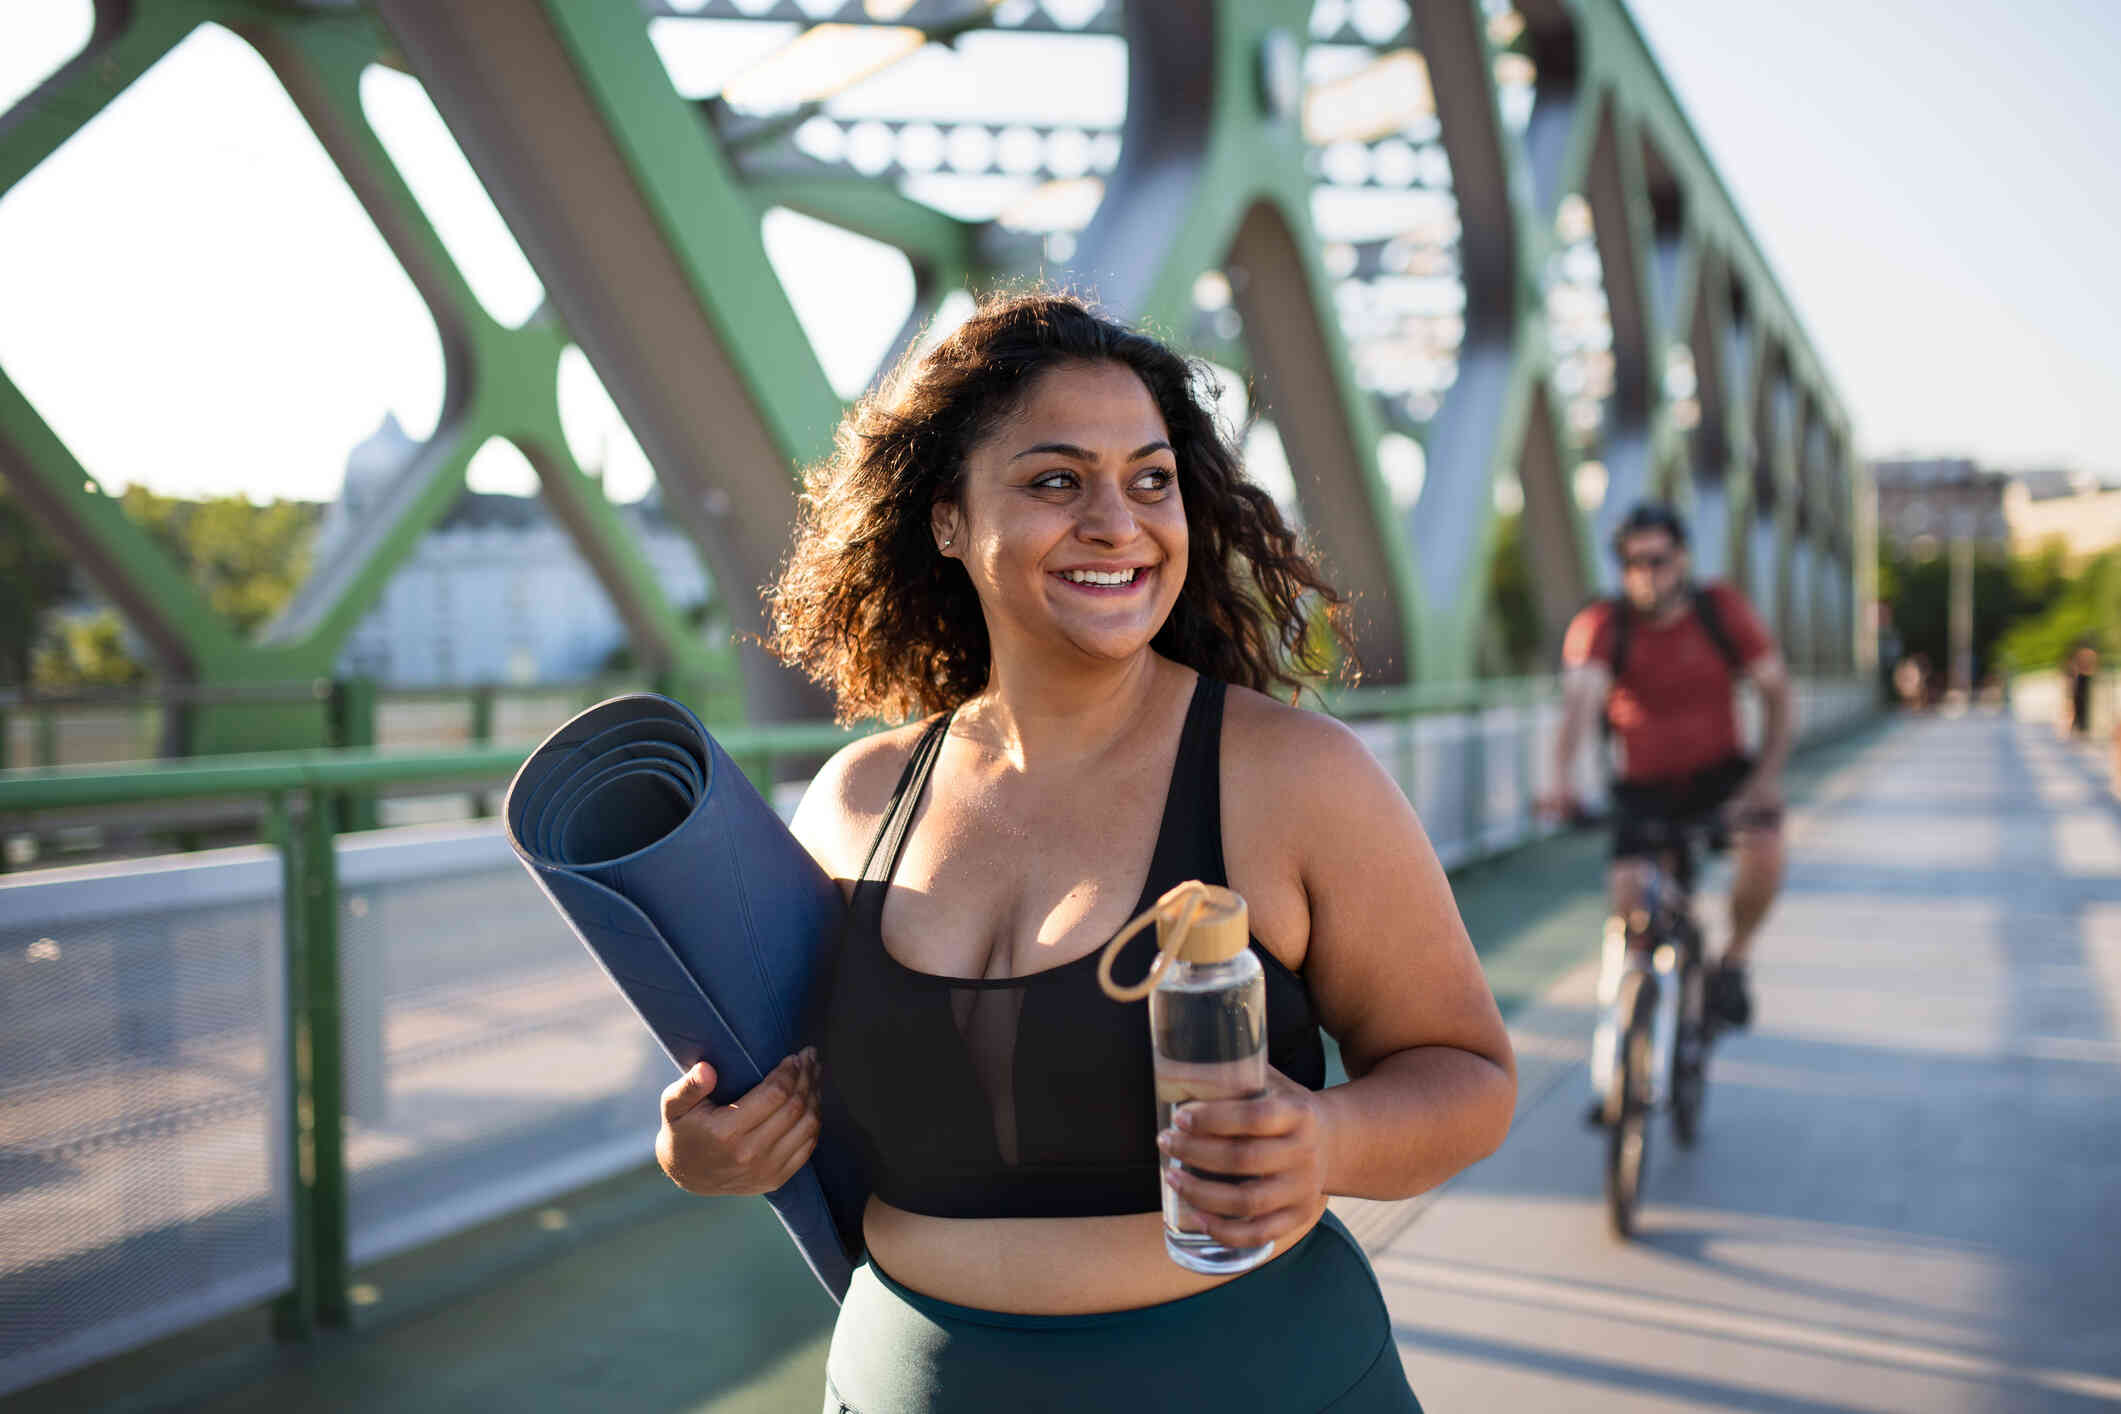 A woman in workout clothes walks along a bridge with a smile while holding a yoga mat and a water bottle.